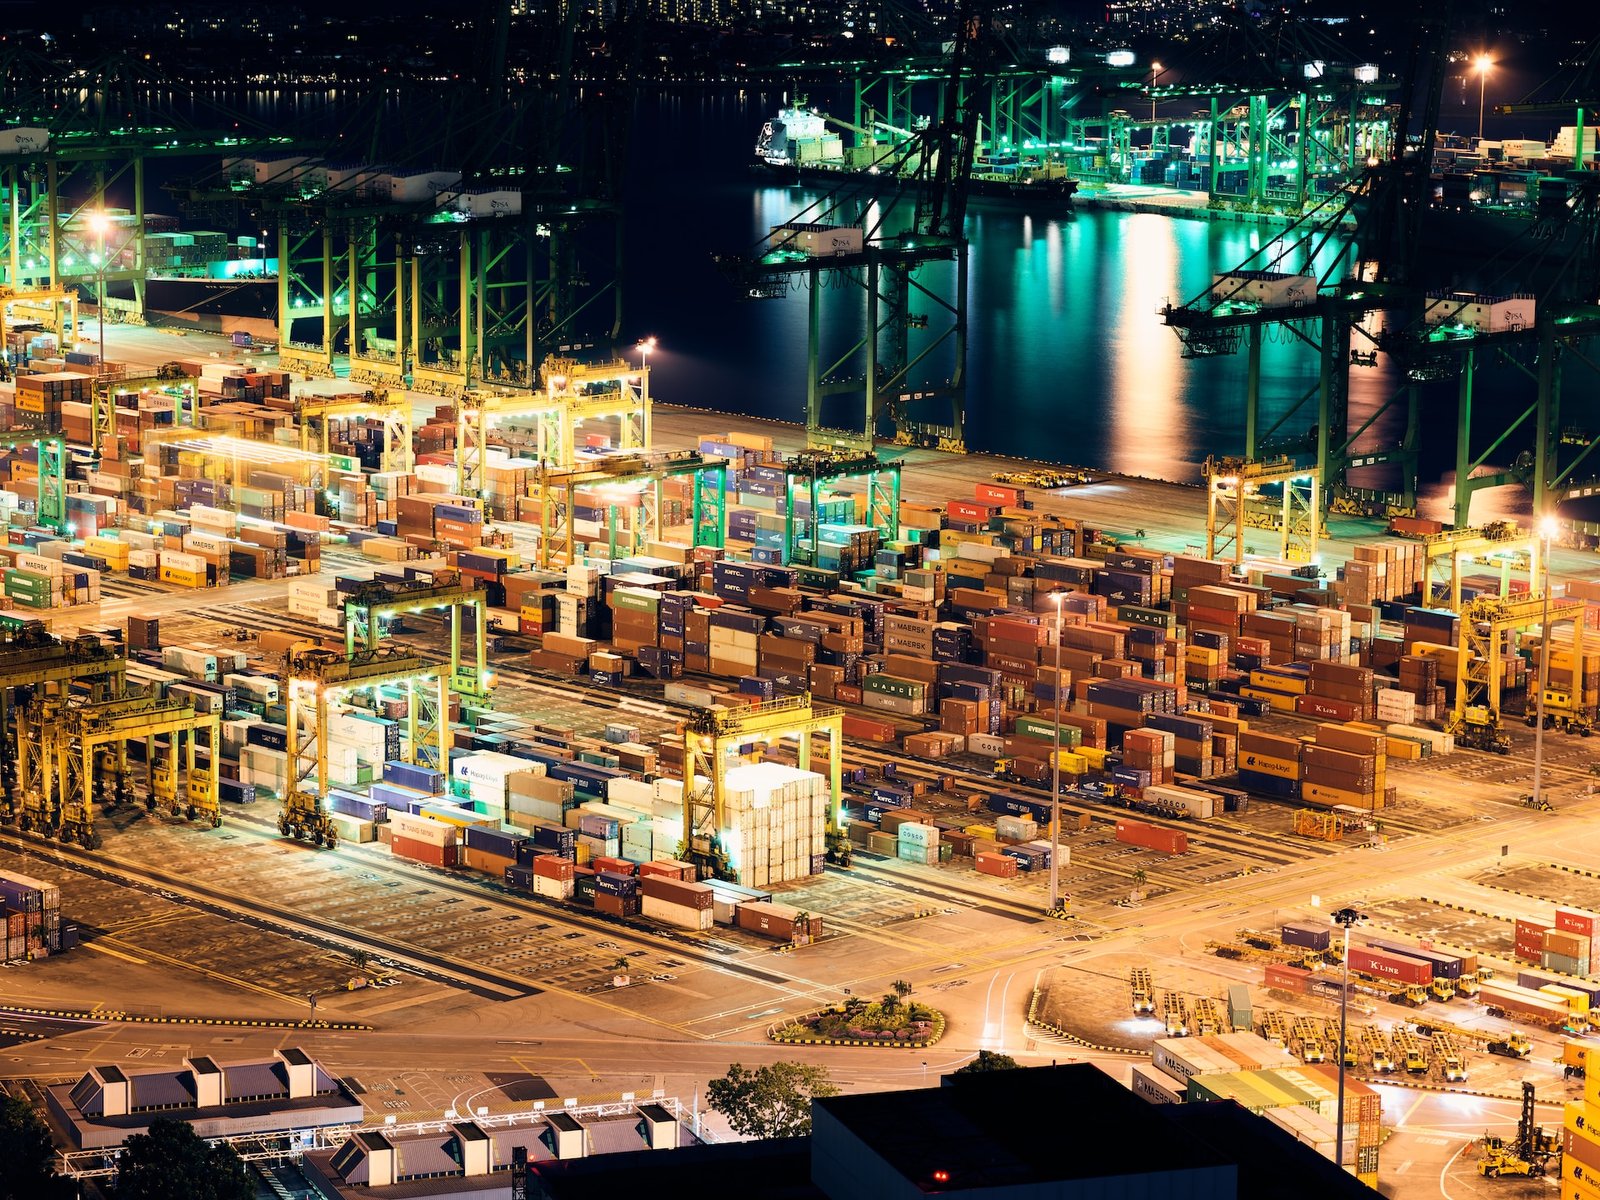 A ship yard with multiple cargo containers